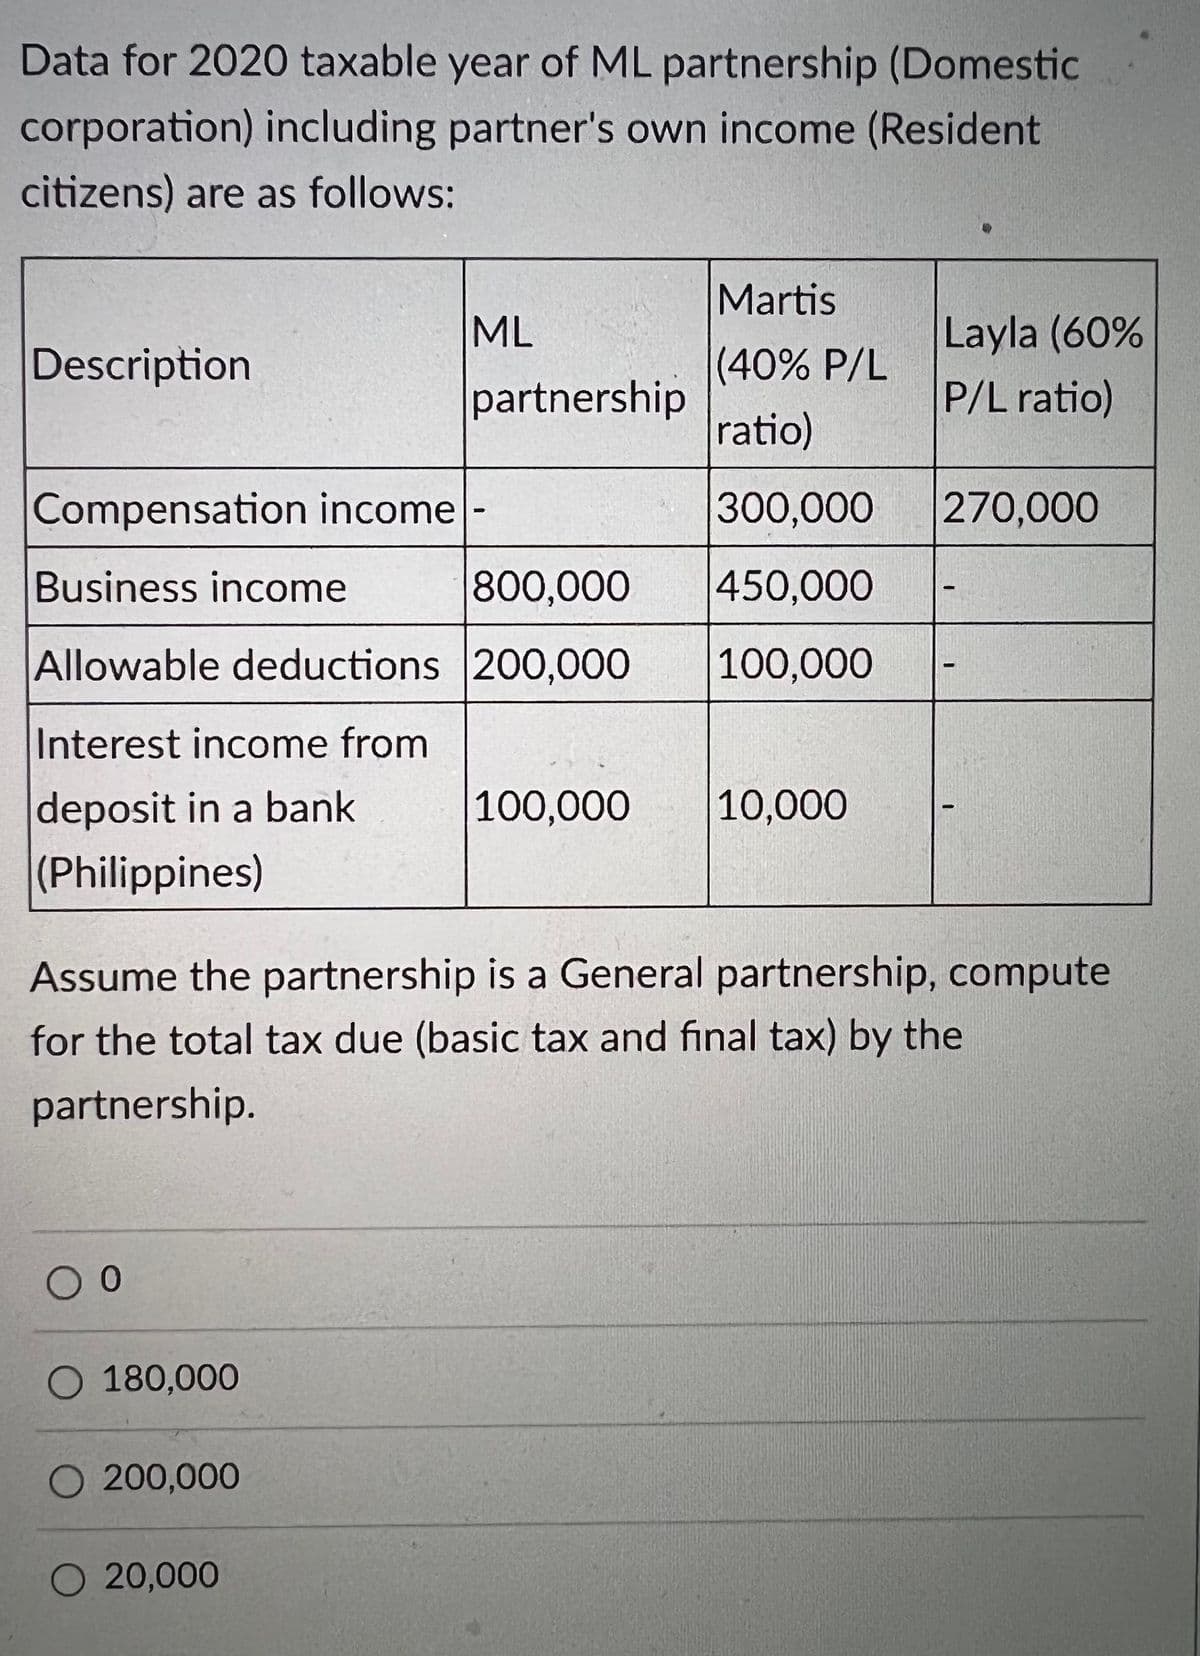 Data for 2020 taxable year of ML partnership (Domestic
corporation) including partner's own income (Resident
citizens) are as follows:
Martis
ML
Layla (60%
Description
(40% P/L
partnership
P/L ratio)
ratio)
Compensation income -
300,000
270,000
Business income
800,000
450,000
Allowable deductions 200,000
100,000
Interest income from
deposit in a bank
100,000
10,000
(Philippines)
Assume the partnership is a General partnership, compute
for the total tax due (basic tax and final tax) by the
partnership.
O 180,000
O 200,000
O 20,000
